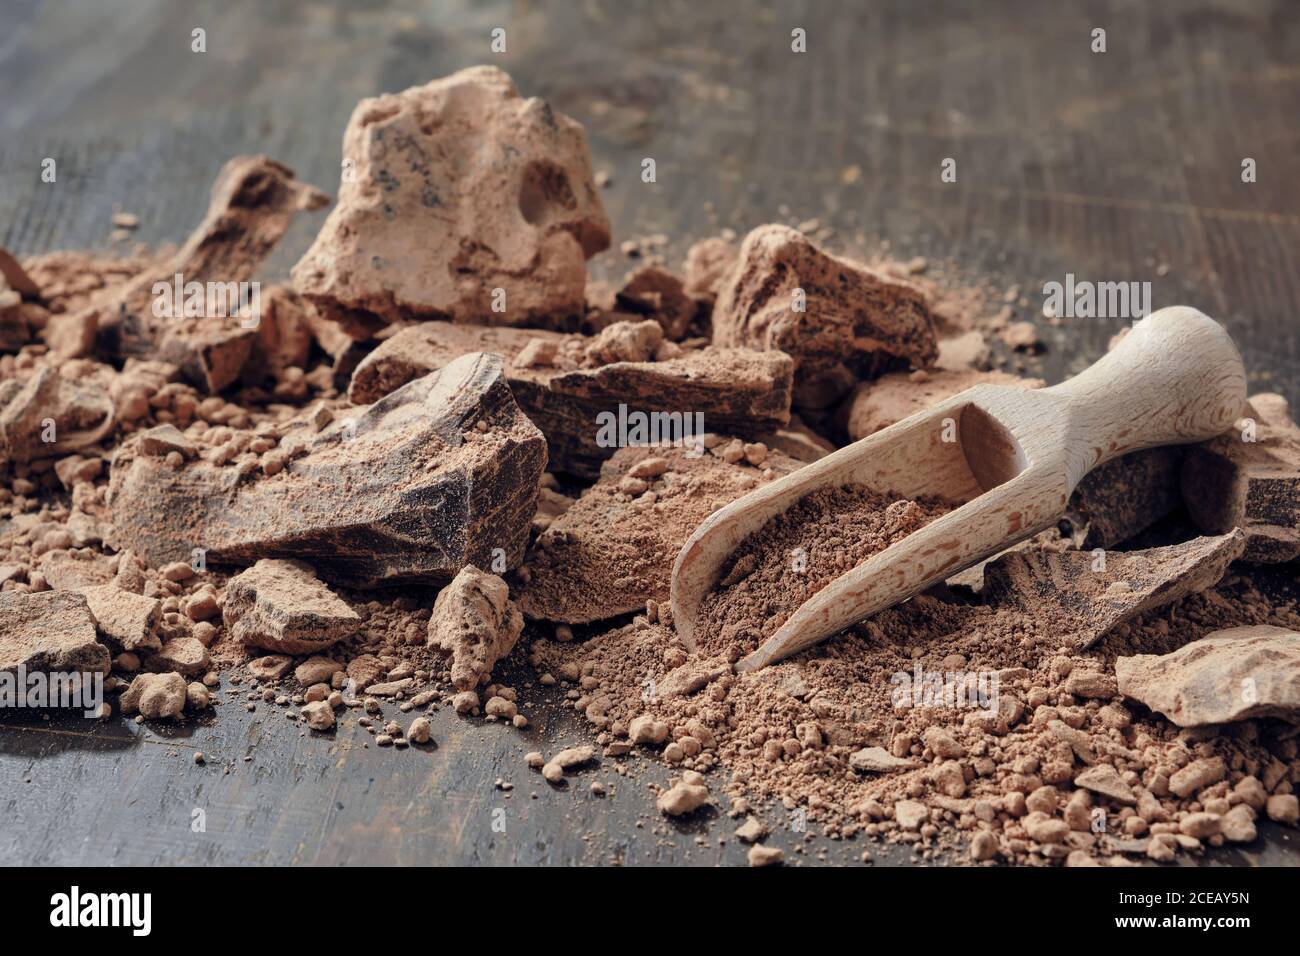 Pieces of grated cocoa. Natural chocolate lumps and wooden scoop on dark wooden table. Stock Photo